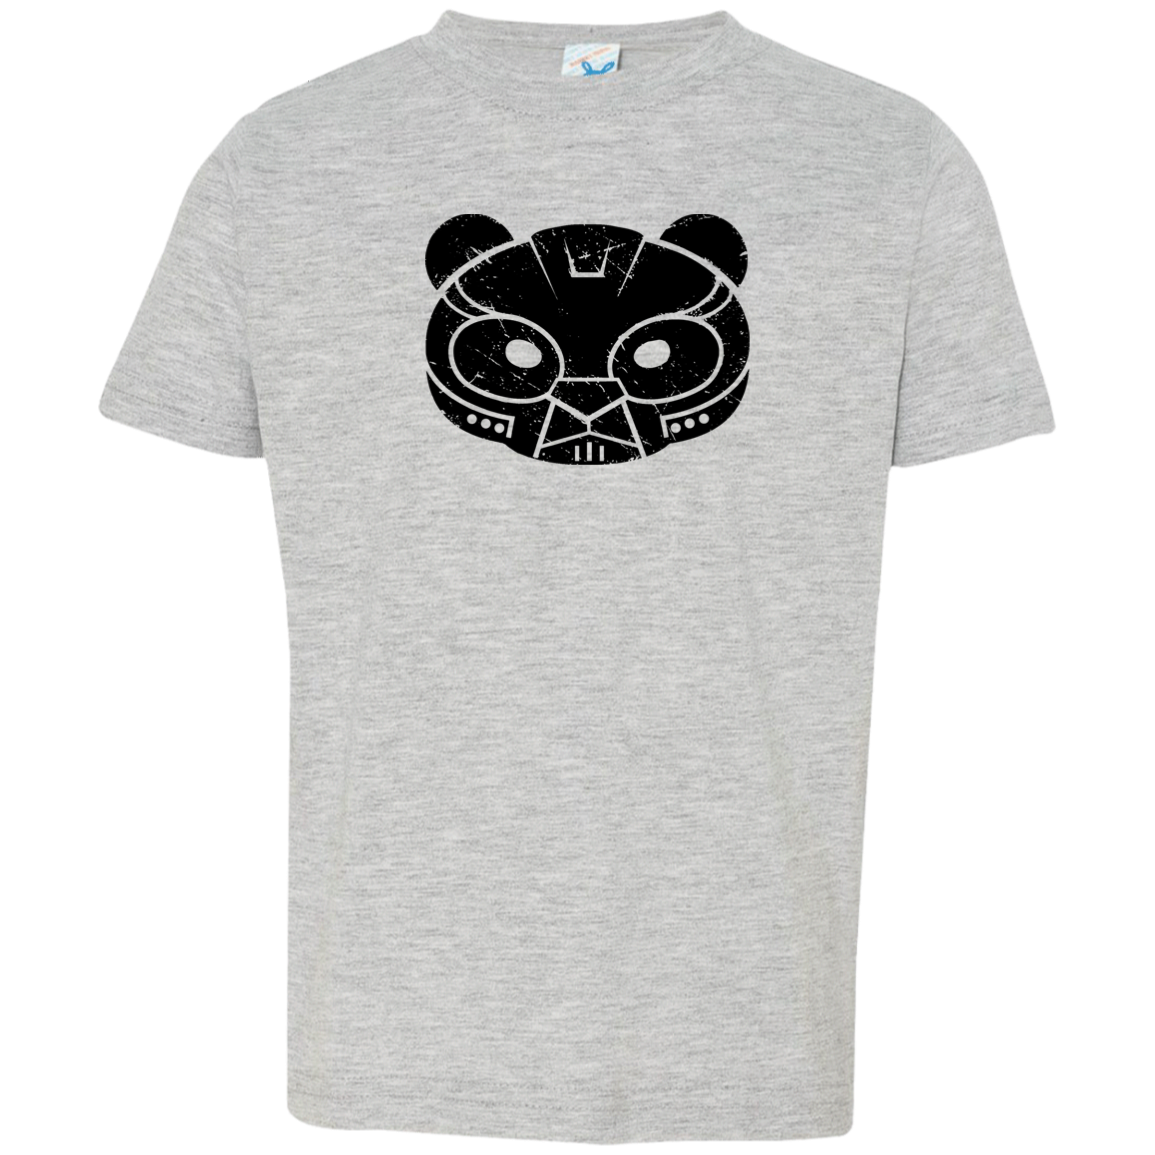 Black Distressed Emblem T-Shirt for Toddlers (Bear Company) - Dark Corps